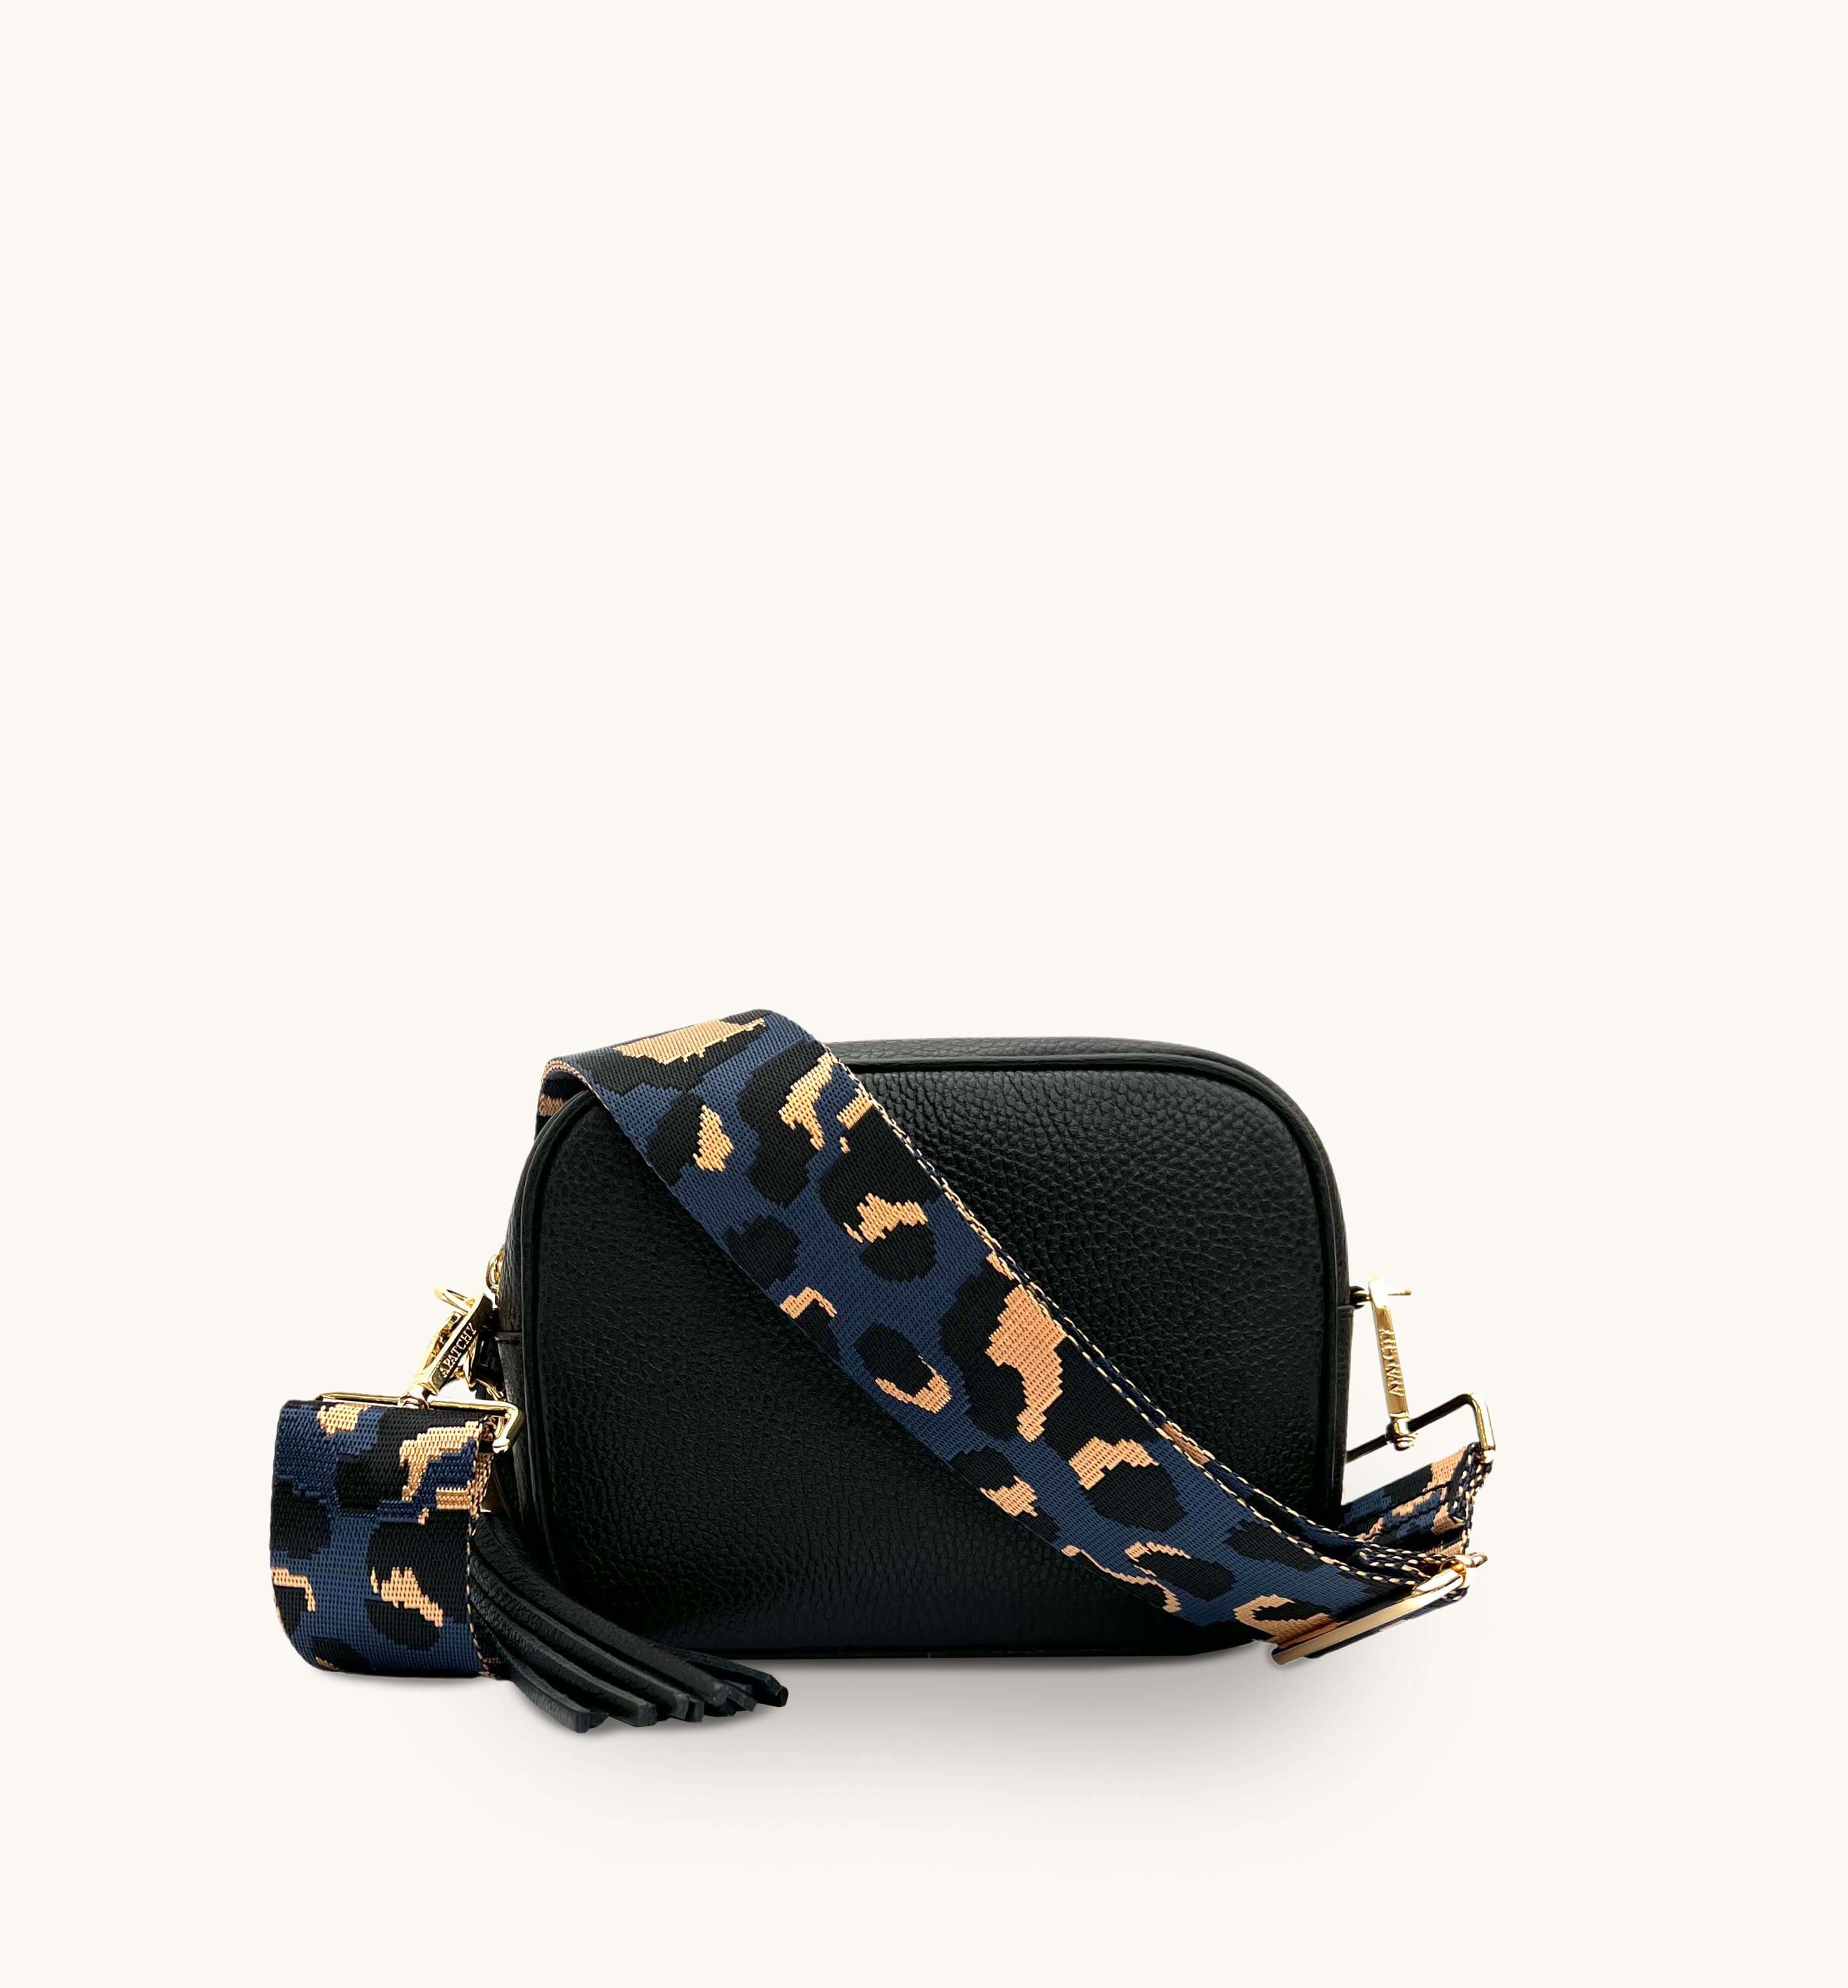 Black Leather Crossbody Bag With Navy Leopard Strap – Apatchy London